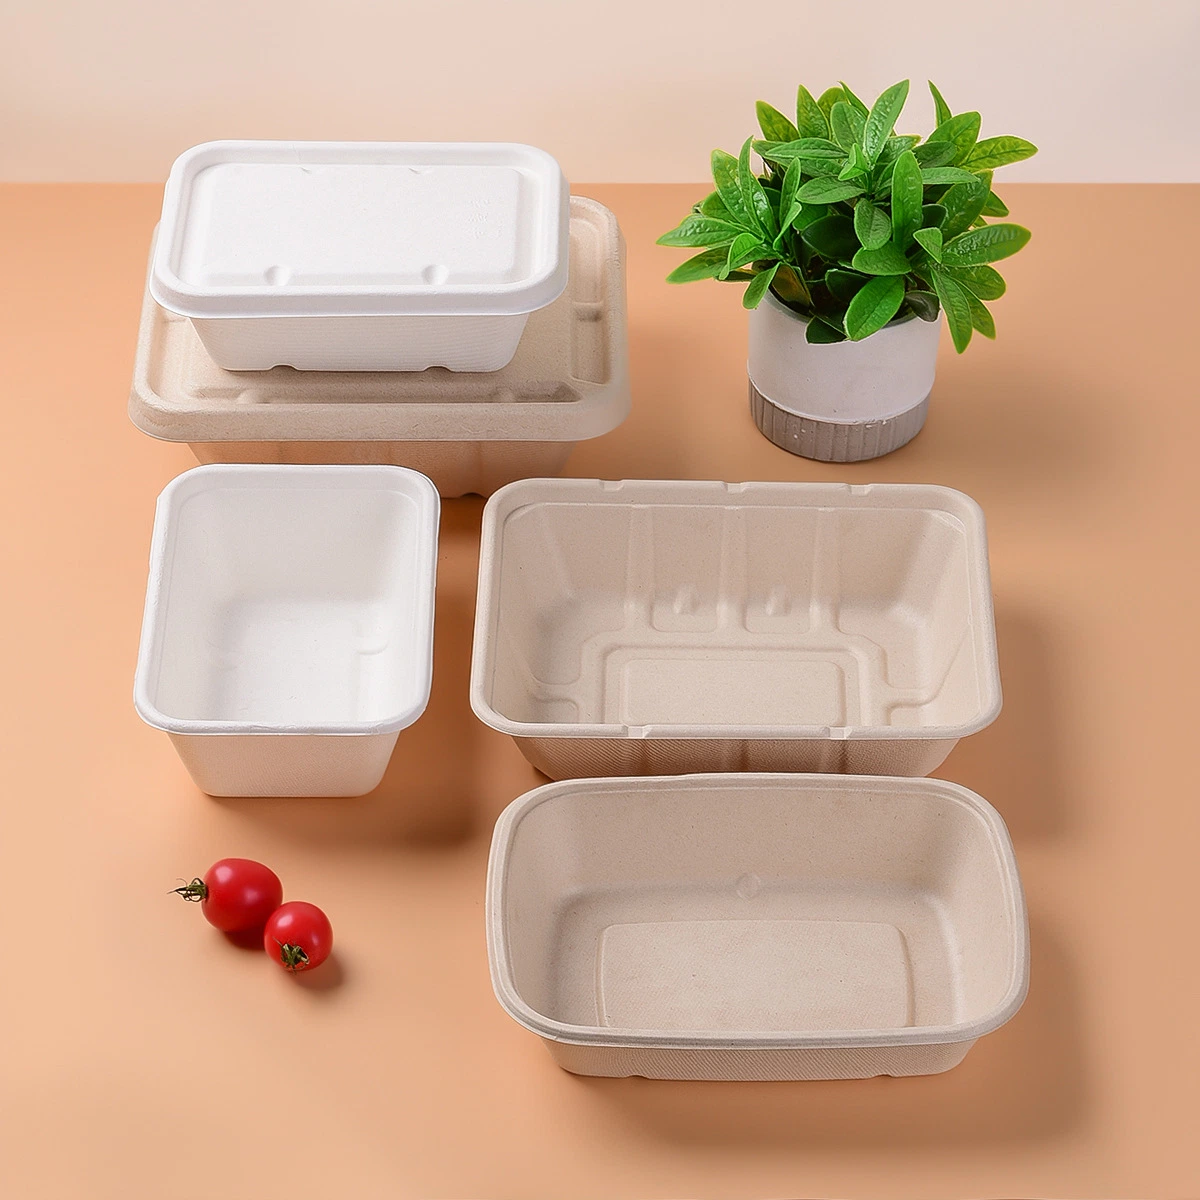 Eco Food Packaging Boxes Biodegradable Lunch Boxes with Lid Sugar Cane Bagasse to Go Disposable Bento Food Container